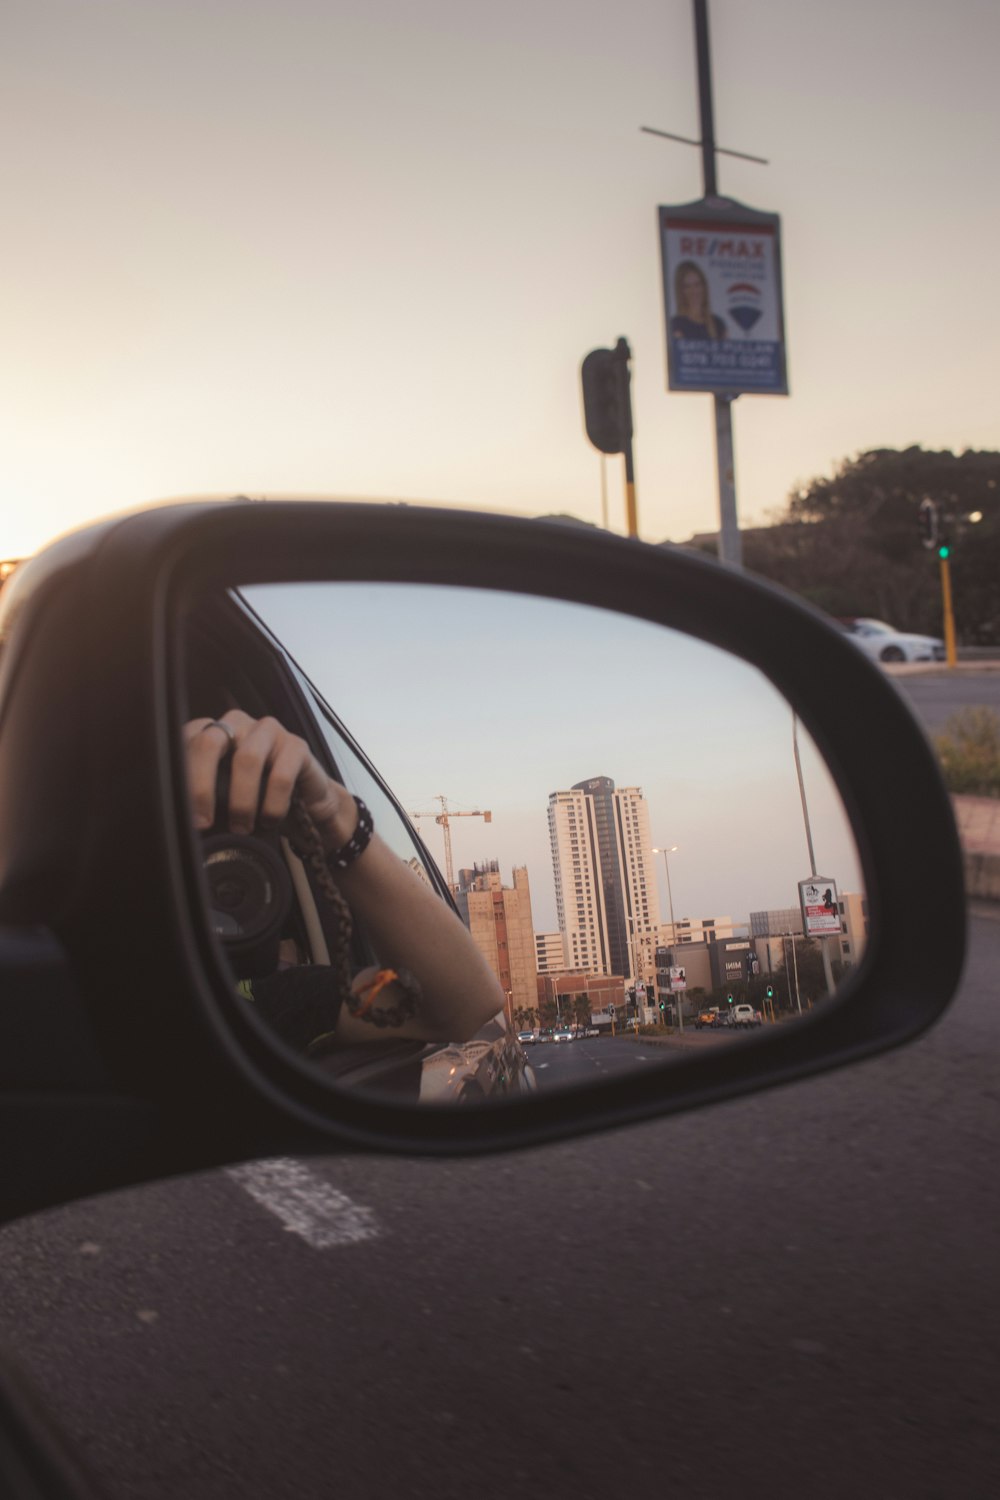 car side mirror showing city buildings during sunset